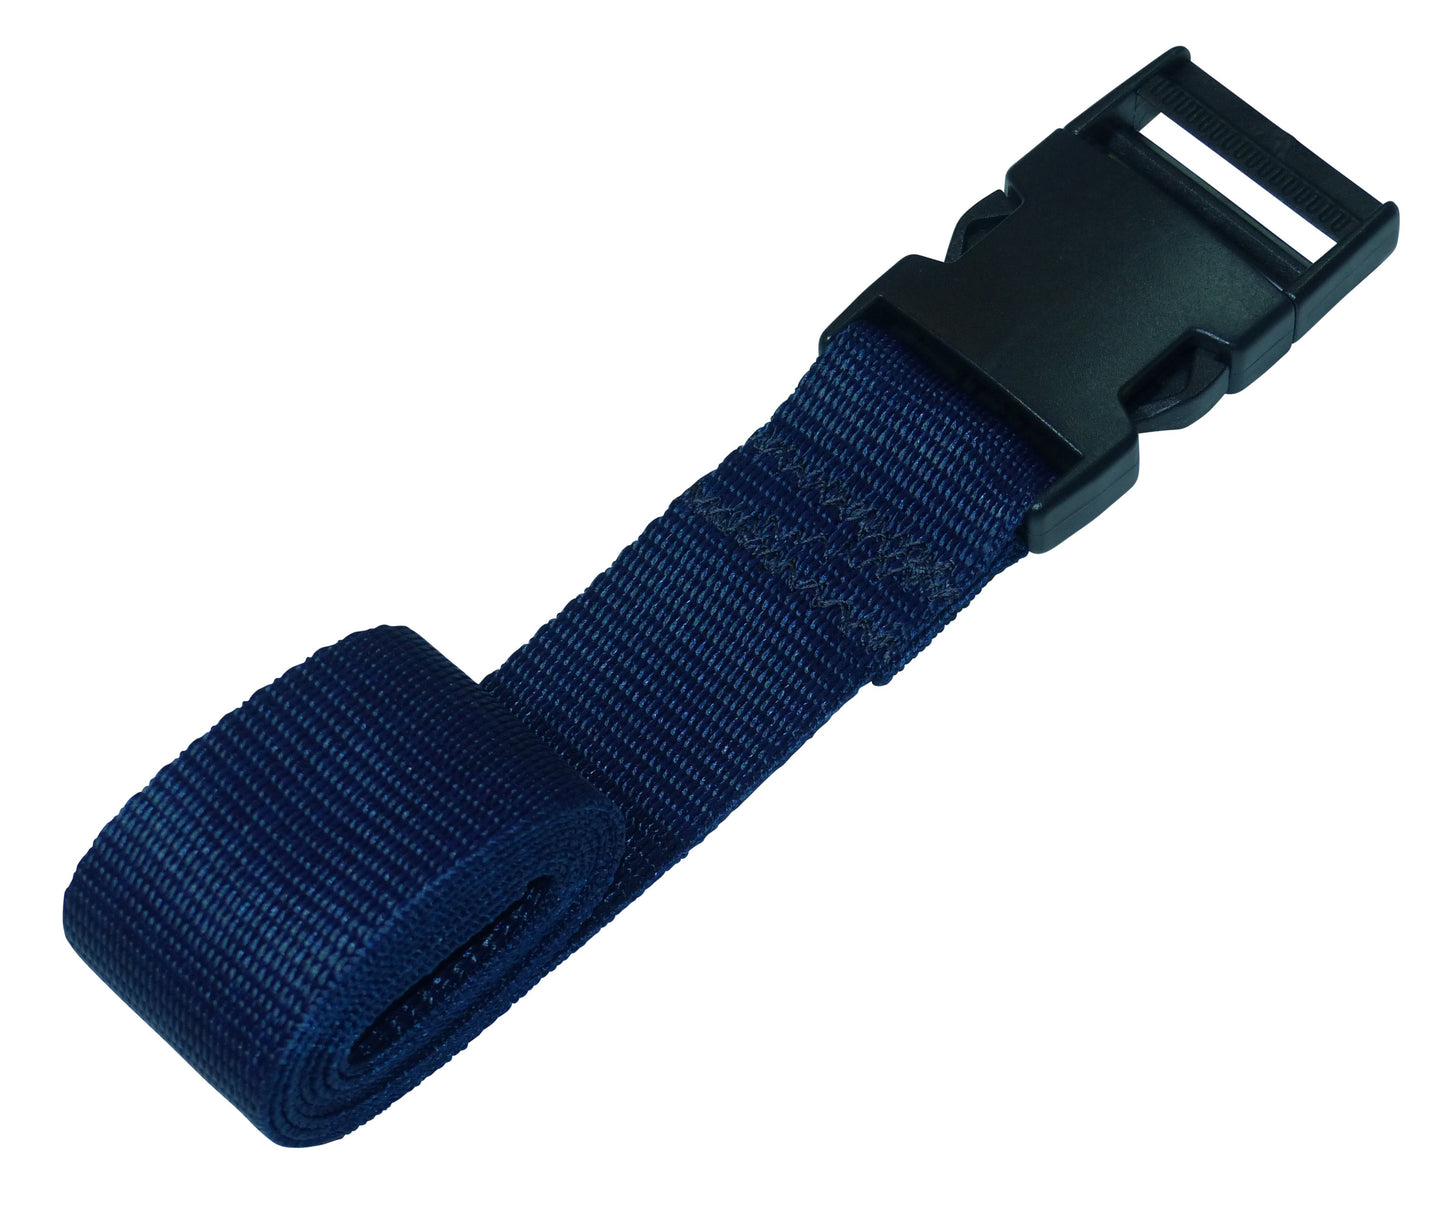 Benristraps 38mm Webbing Strap with Quick Release Buckle in navy blue